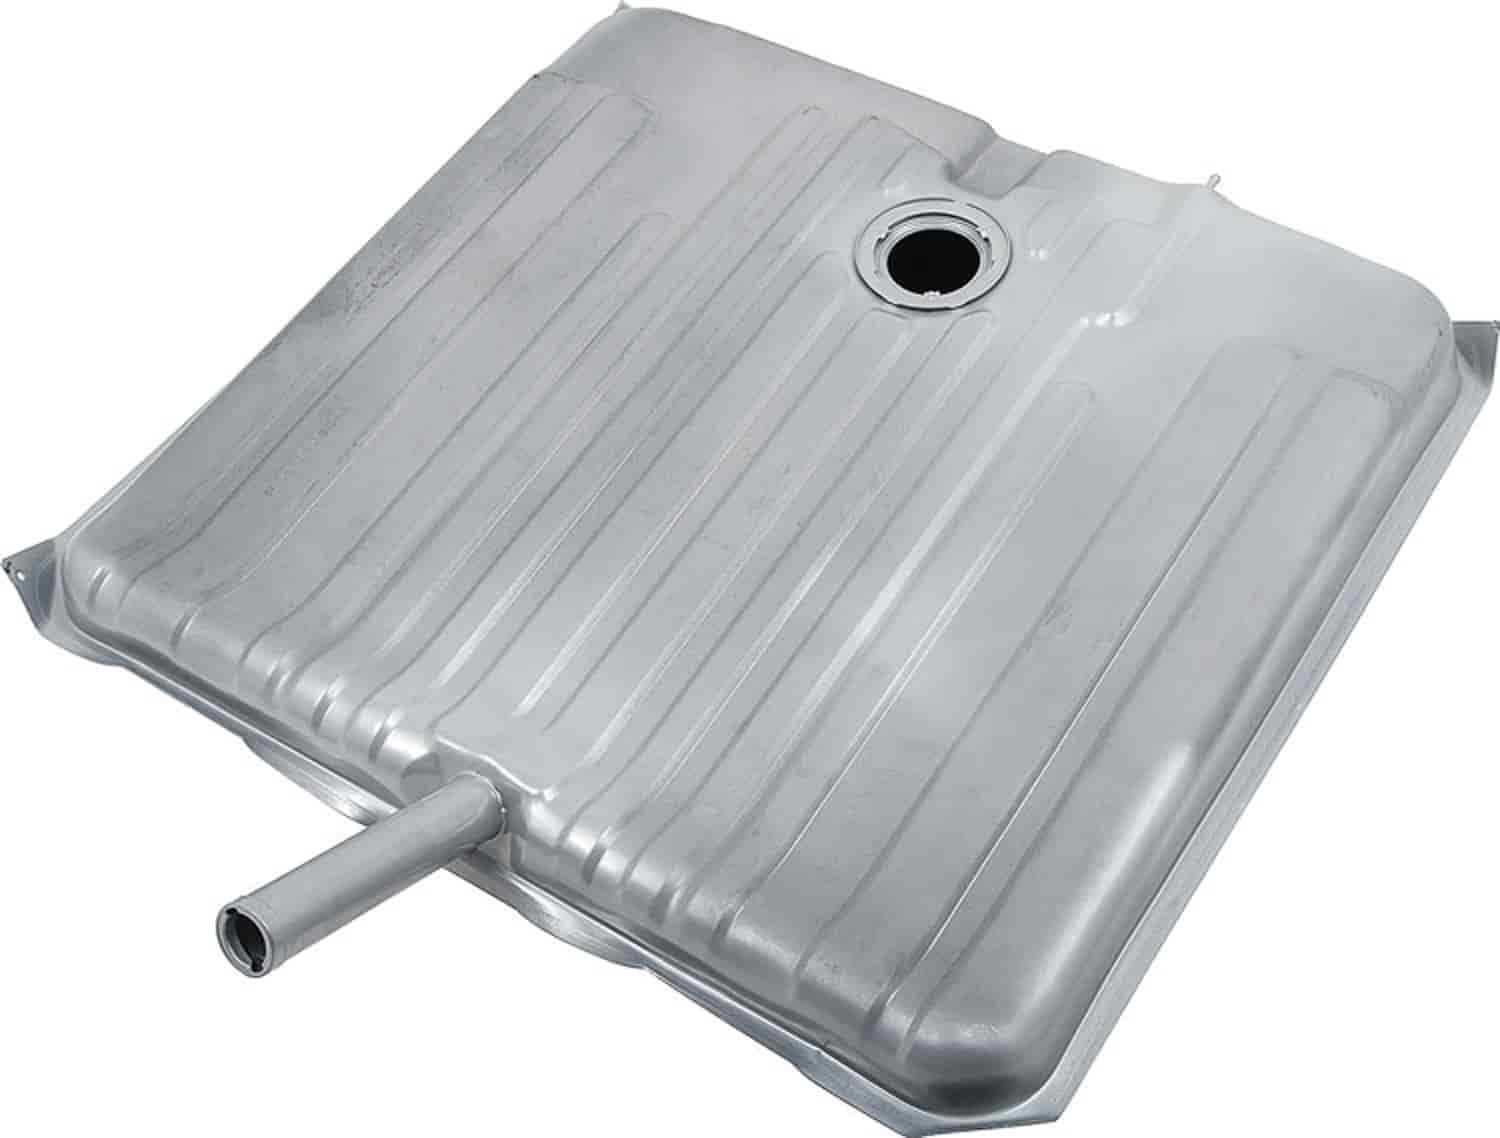 Zinc Coated Steel Fuel Tank 1968 Chevy Full Size Cars